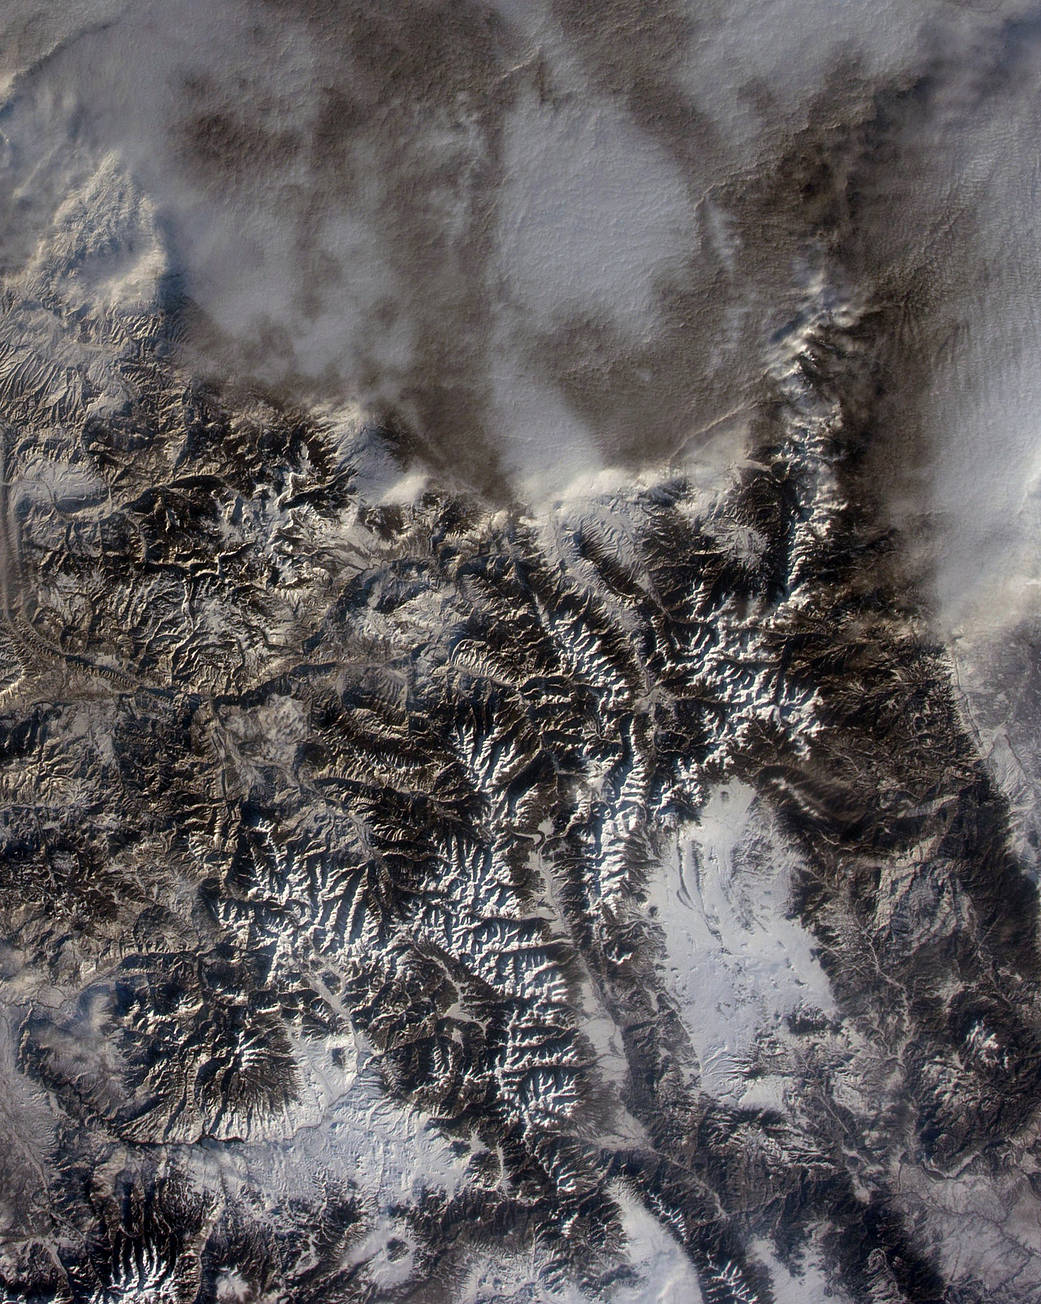 Rocky Mountains, Colorado taken from the International Space Station on Jan. 2, 2015 by Expedition 42 Flight Engineer Terry Virt